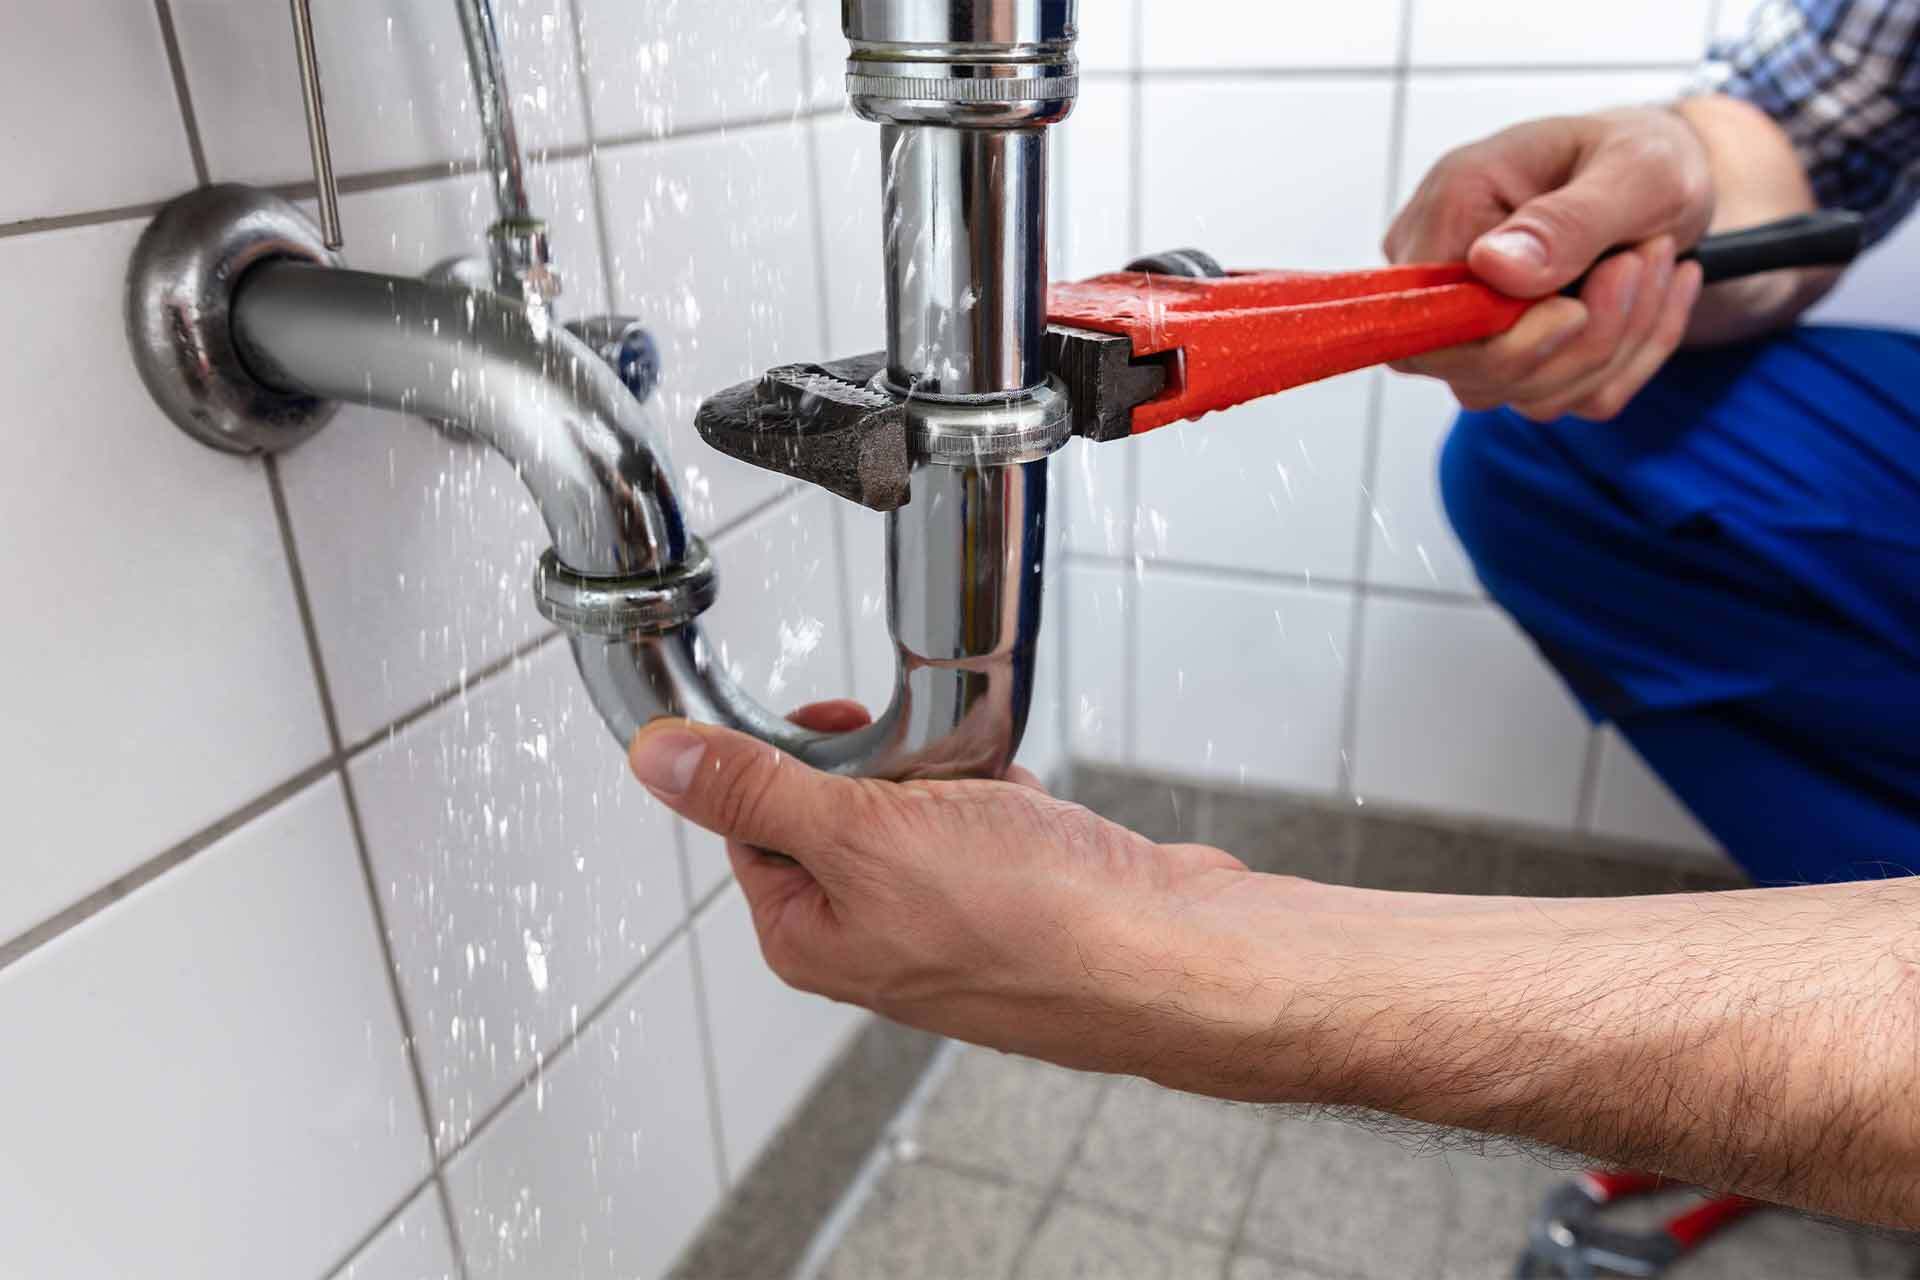 6 REASONS TO HIRE PROFESSIONAL DRAIN CLEANING SERVICES